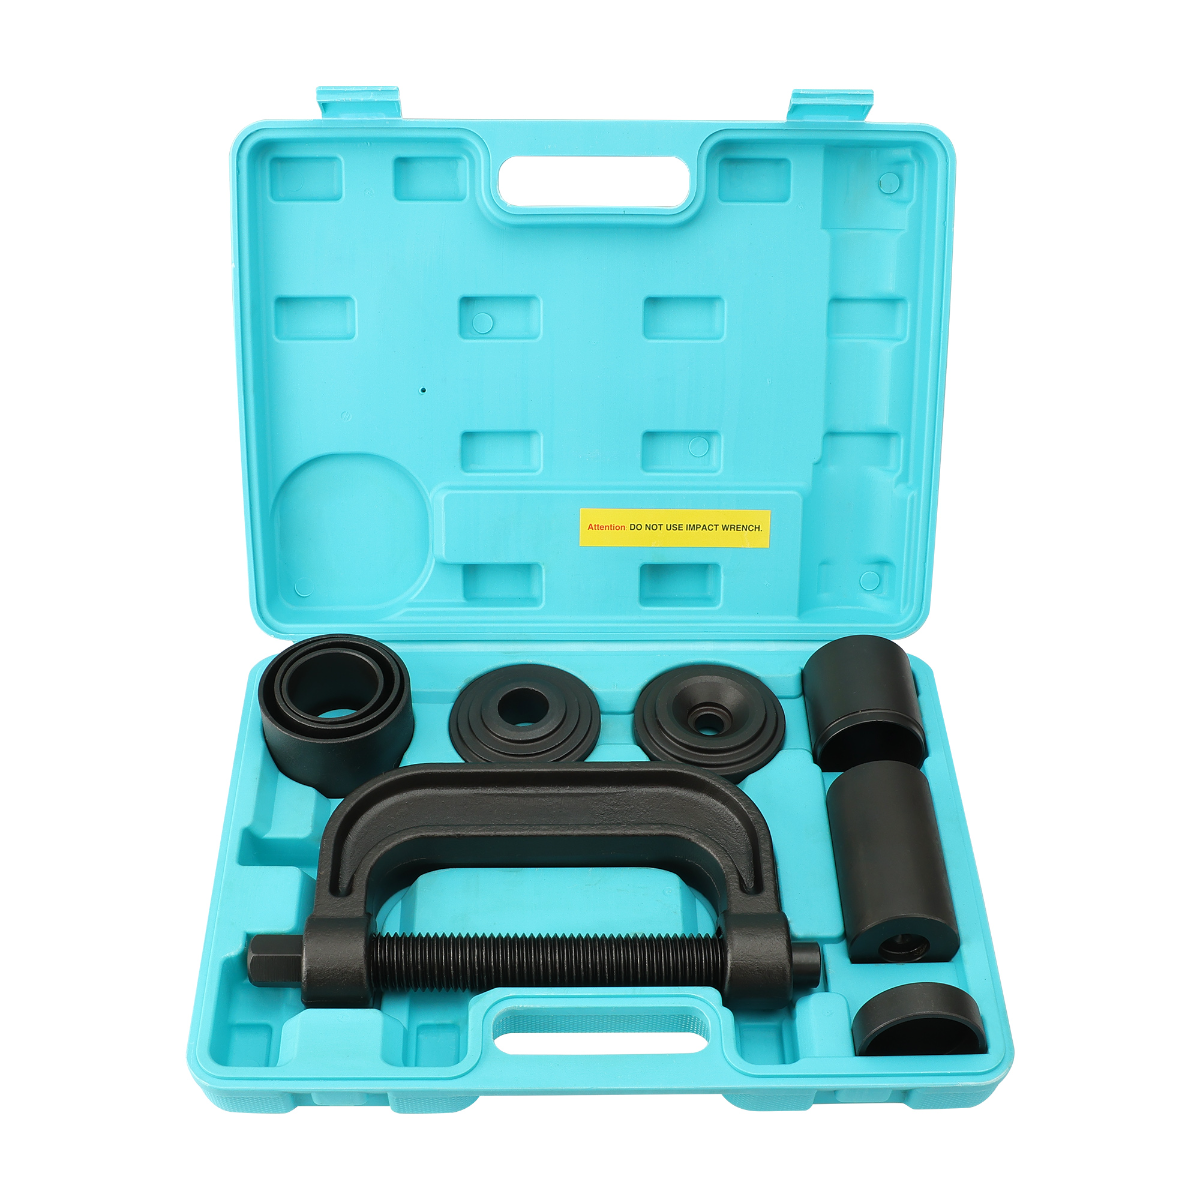 DURATECH Heavy Duty Ball Removal Installer Tool Kit